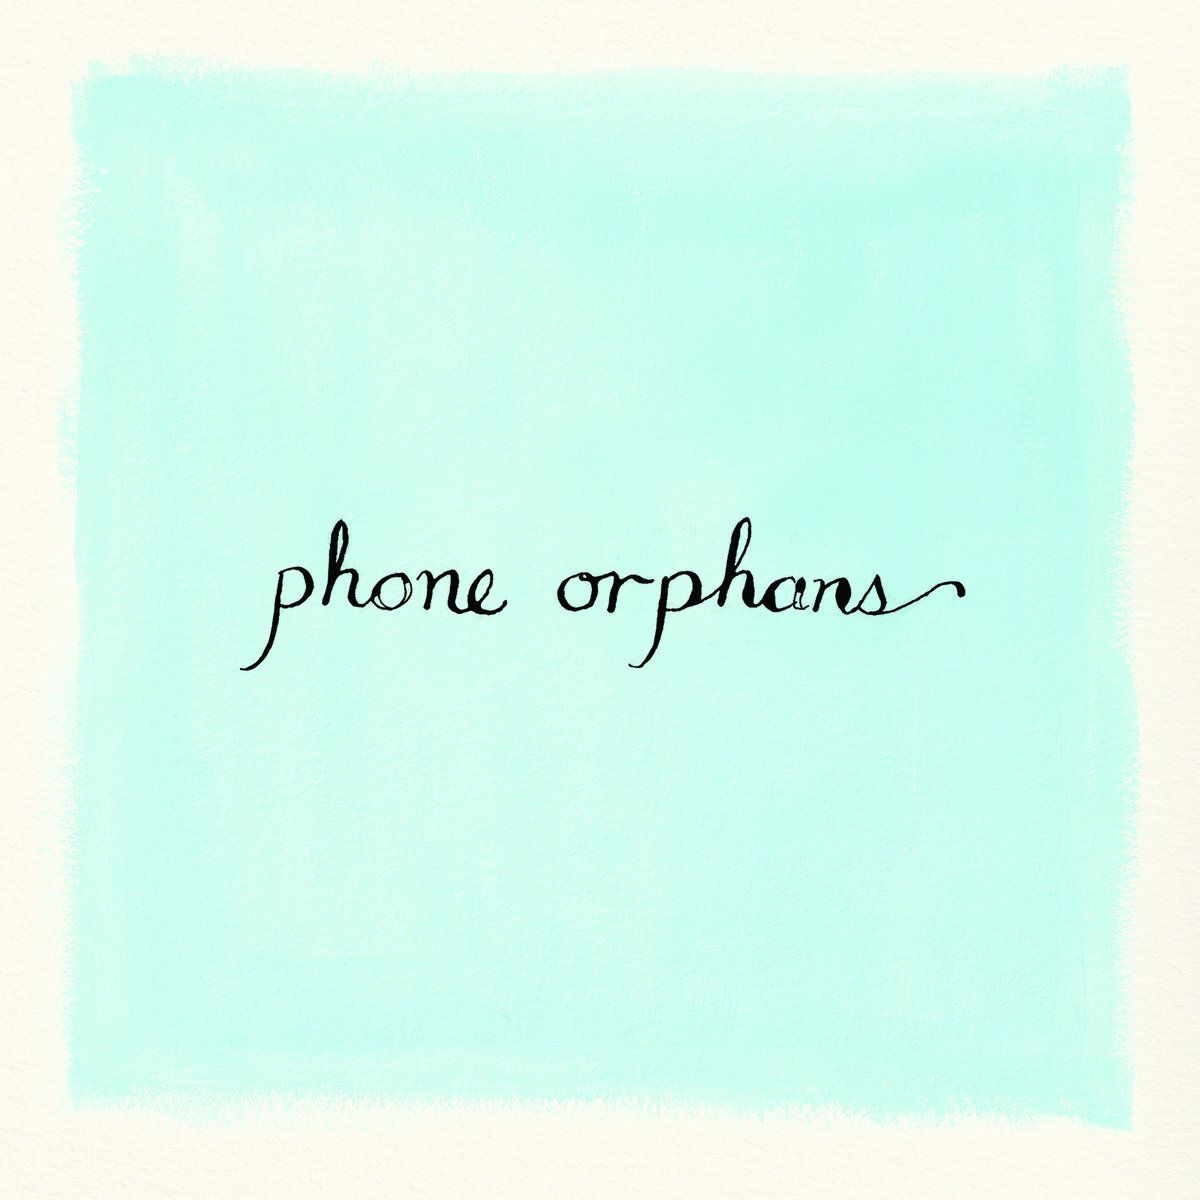 Hang+up%21+%E2%80%98Phone+Orphans%E2%80%99+is+on+the+line